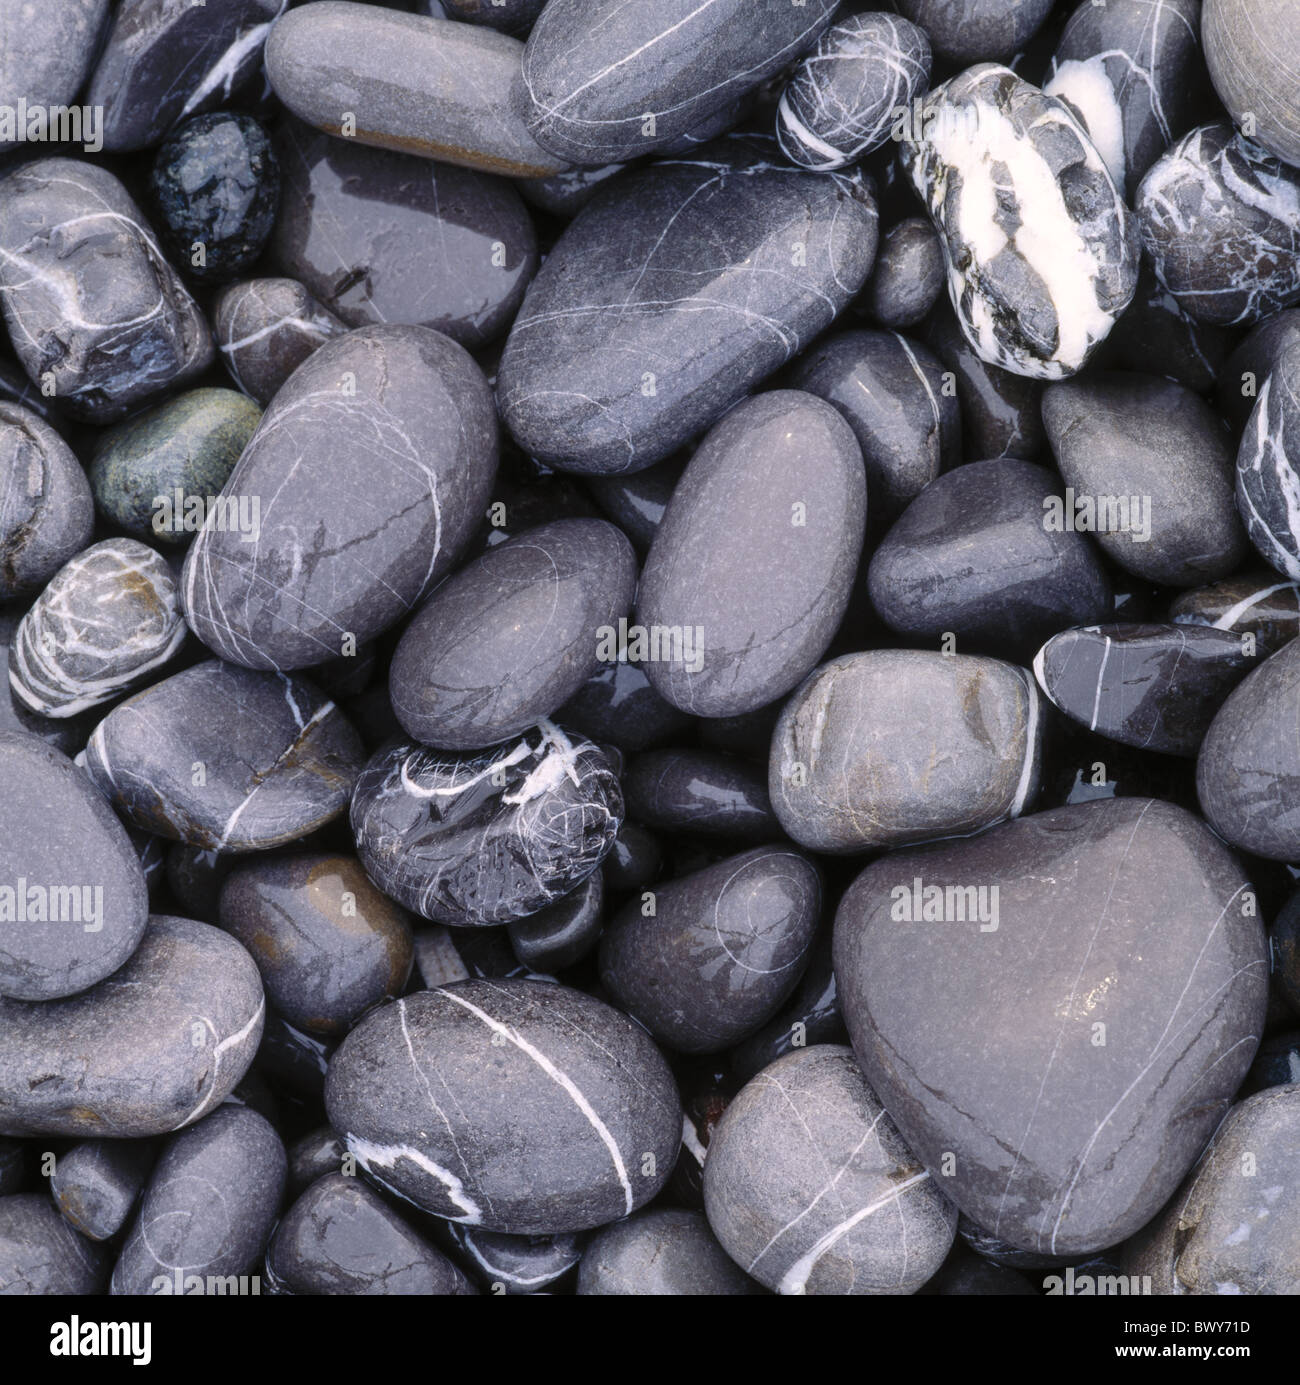 pattern figured brilliant gray wet stones passed away stones structure background Stock Photo